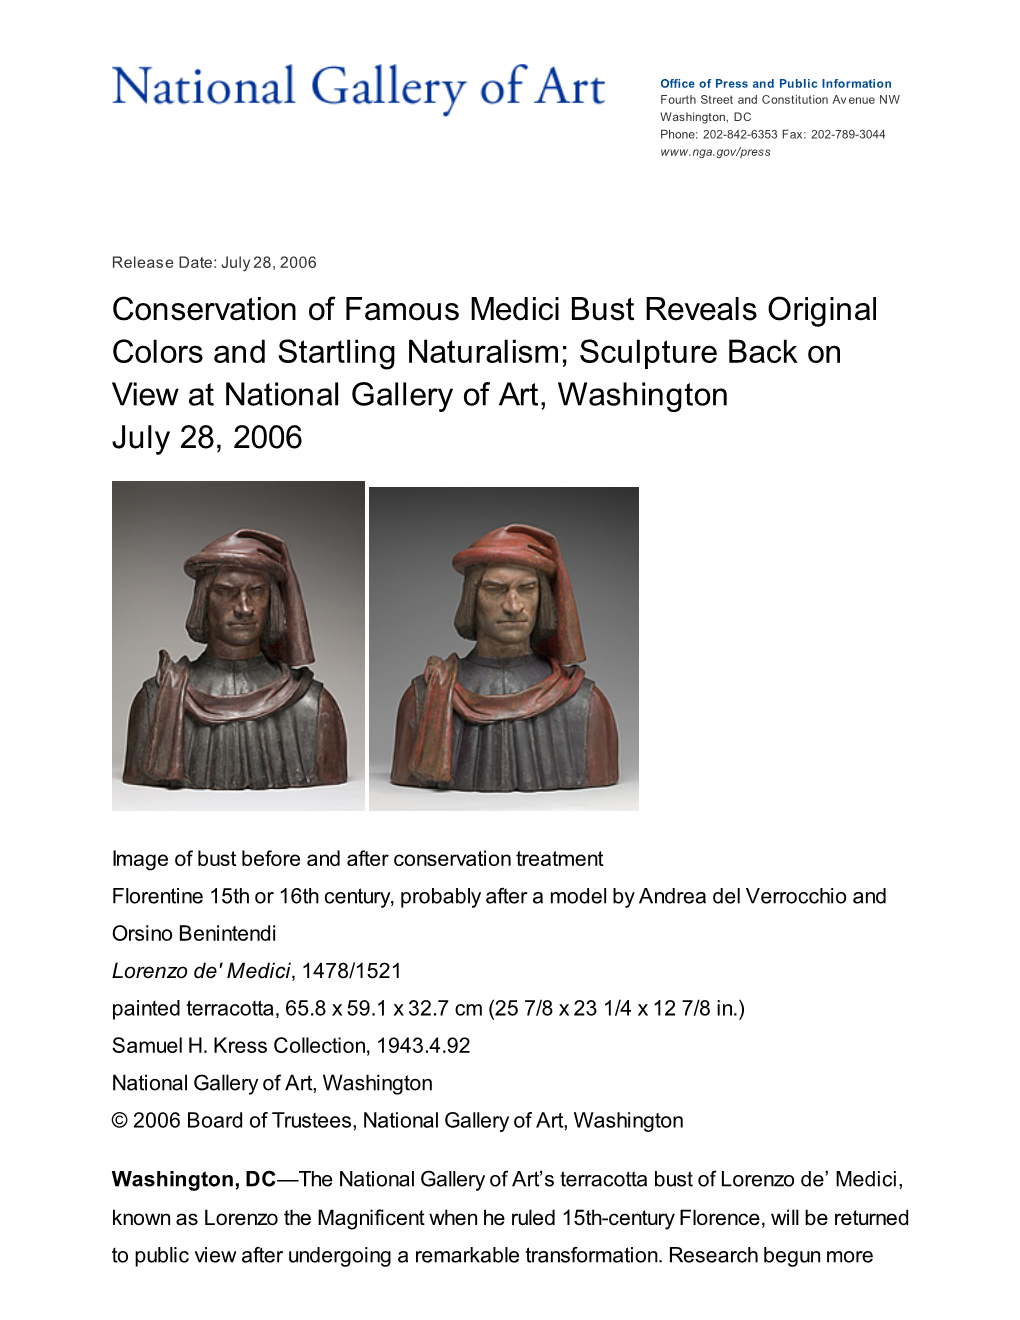 Conservation of Famous Medici Bust Reveals Original Colors and Startling Naturalism; Sculpture Back on View at National Gallery of Art, Washington July 28, 2006